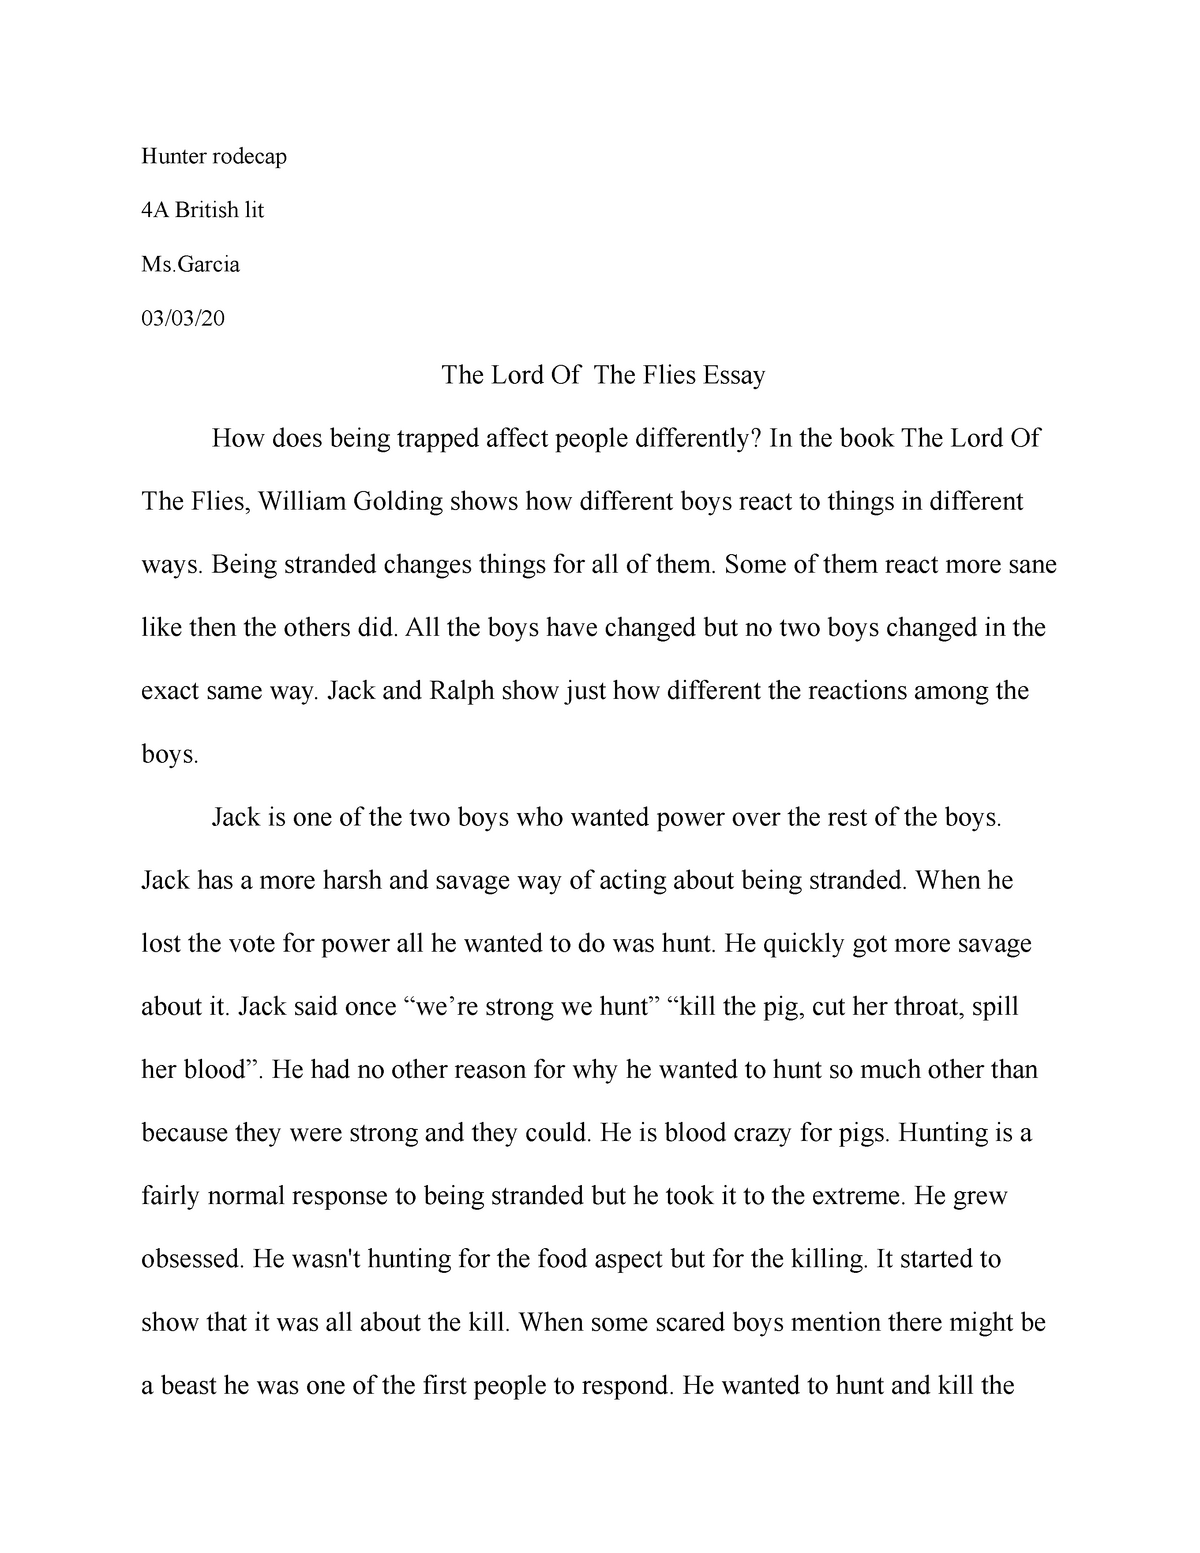 lord of the flies extended essay